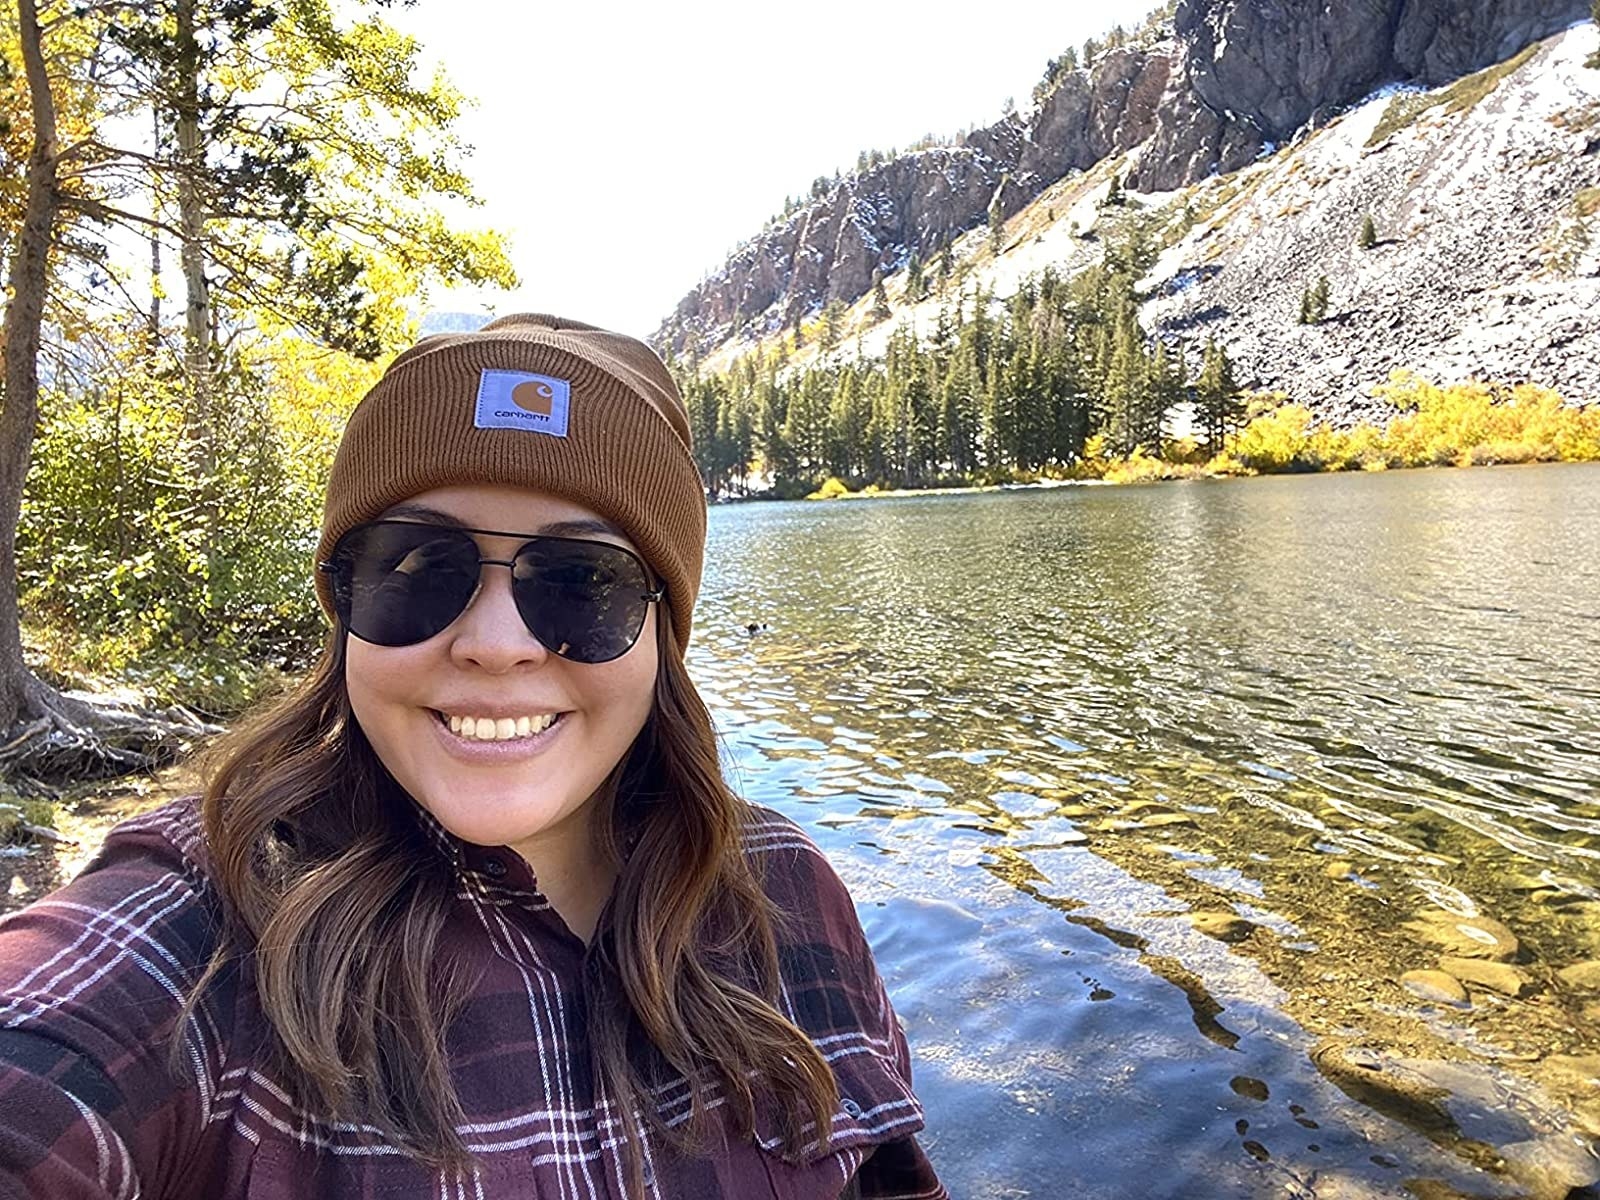 a reviewer photo of a person wearing the brown beanie and sunglasses, in front of a river and a mountain